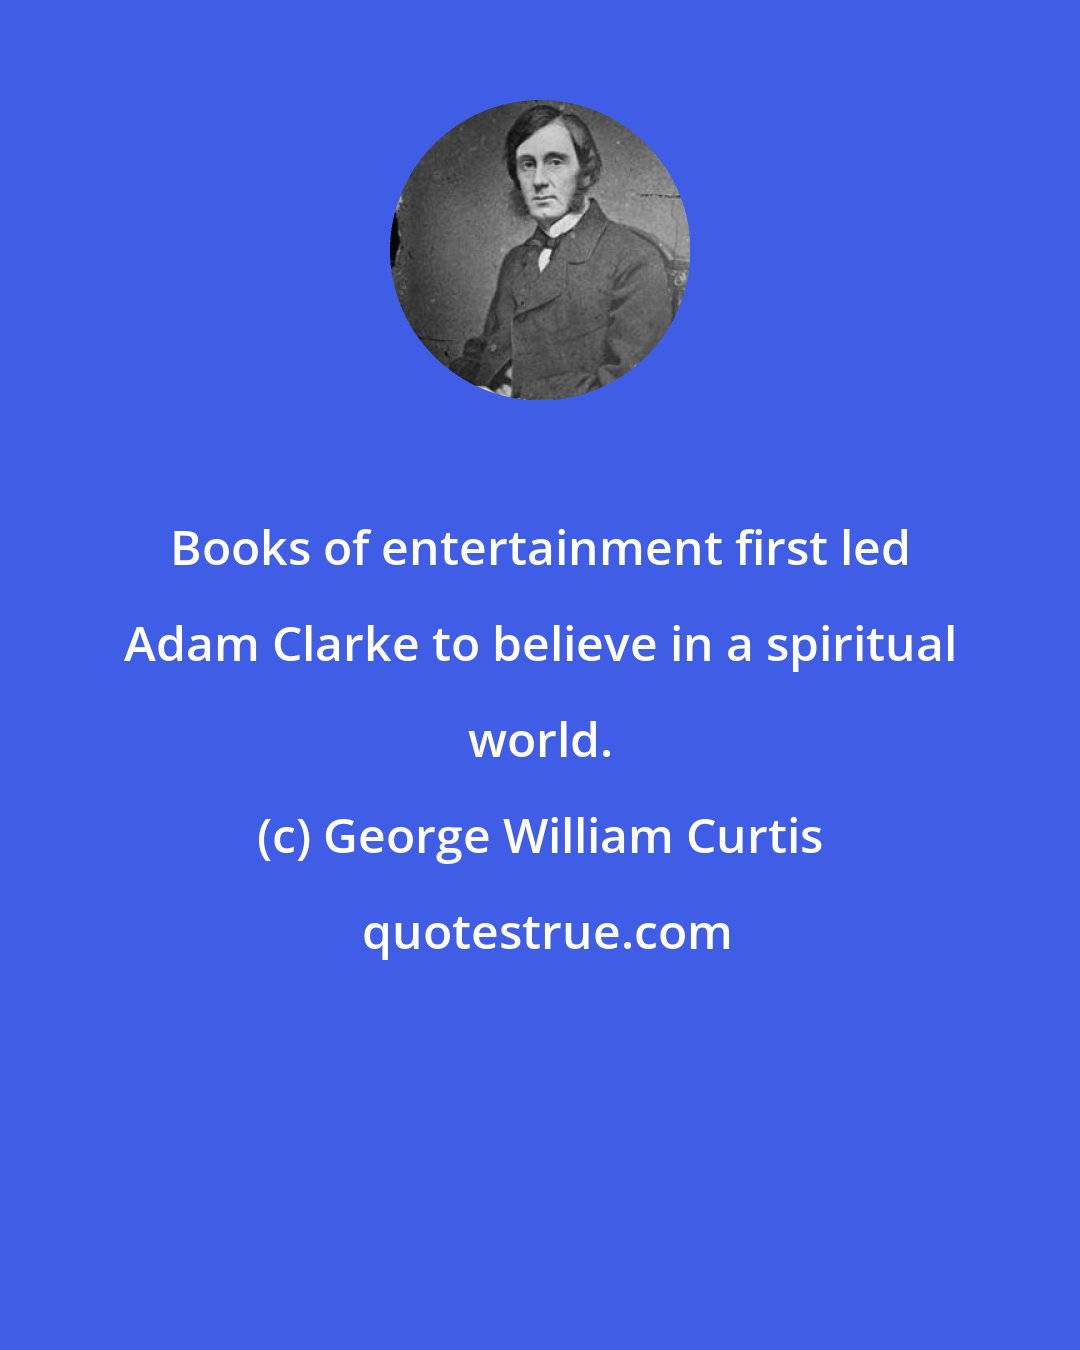 George William Curtis: Books of entertainment first led Adam Clarke to believe in a spiritual world.